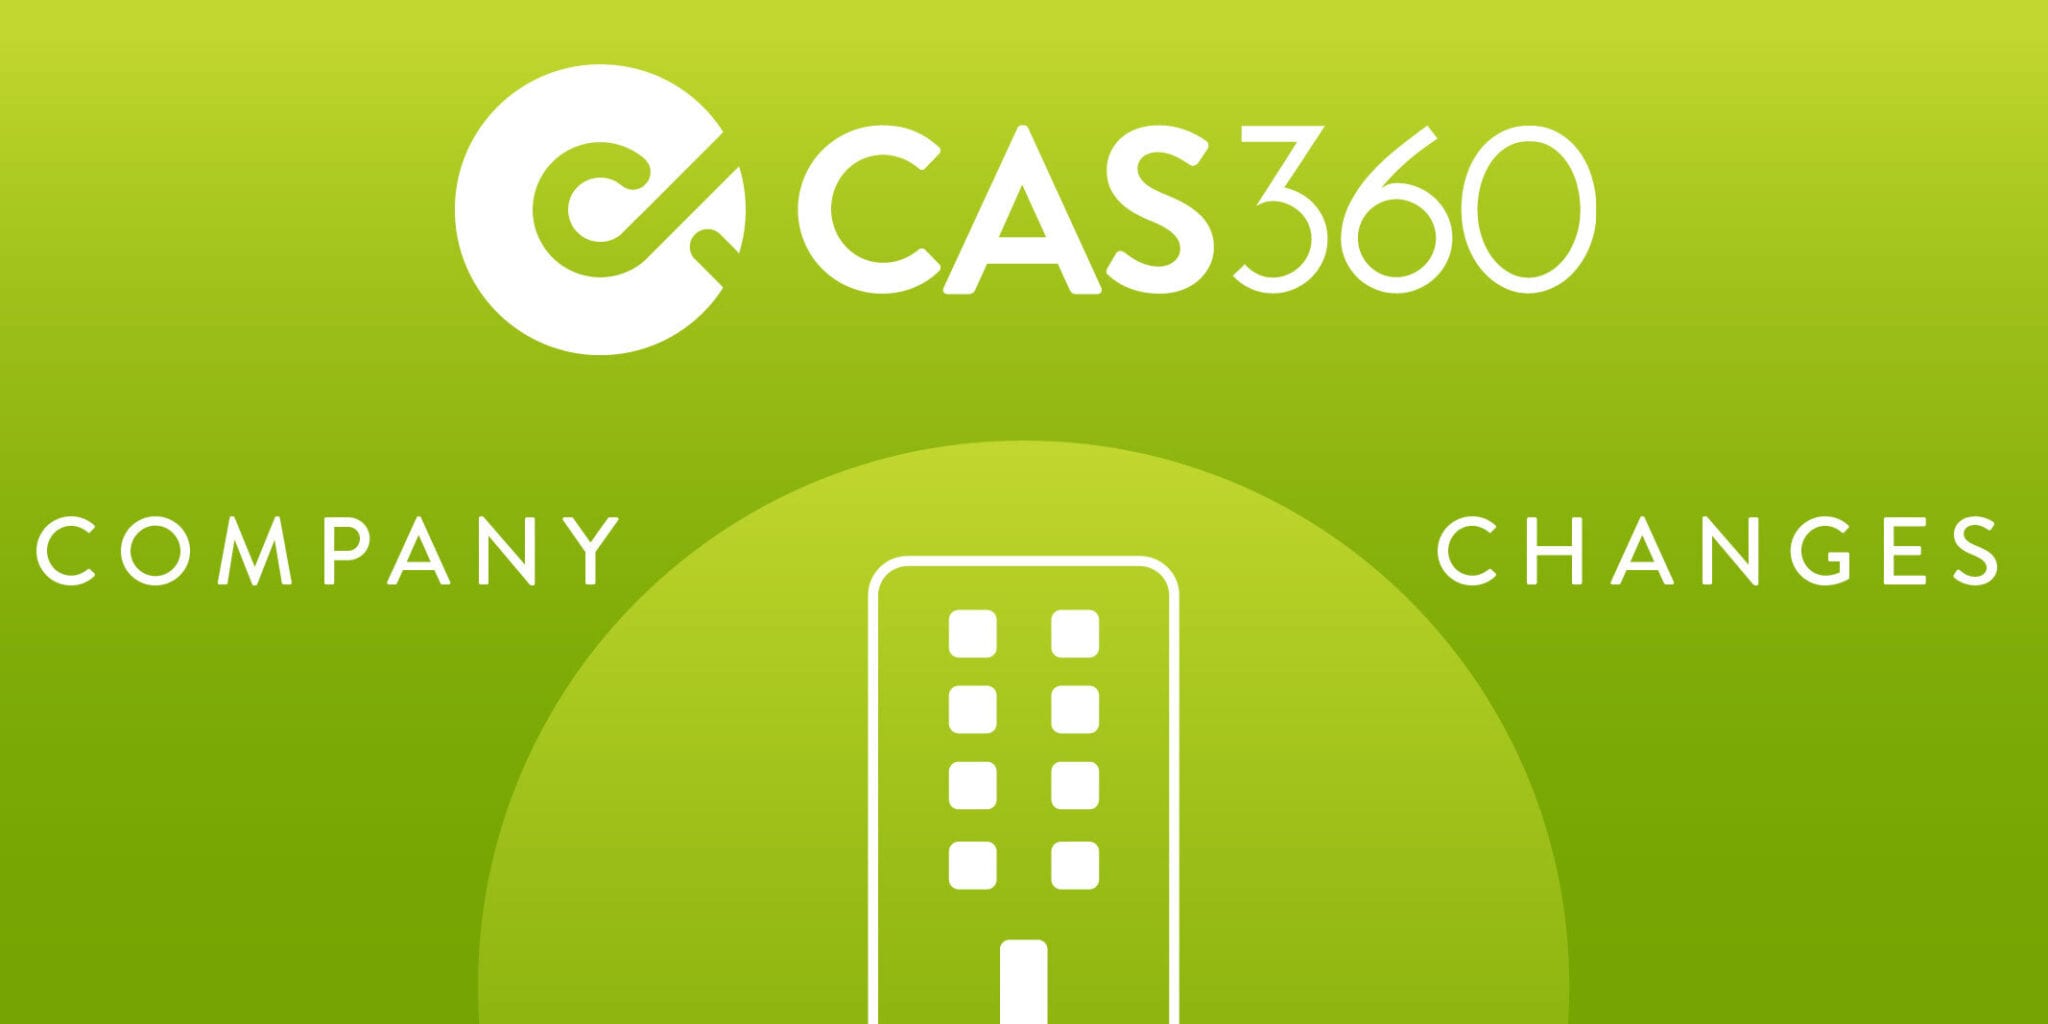 CAS 360 Company Changes | BGL Corporate Solutions Pty Ltd